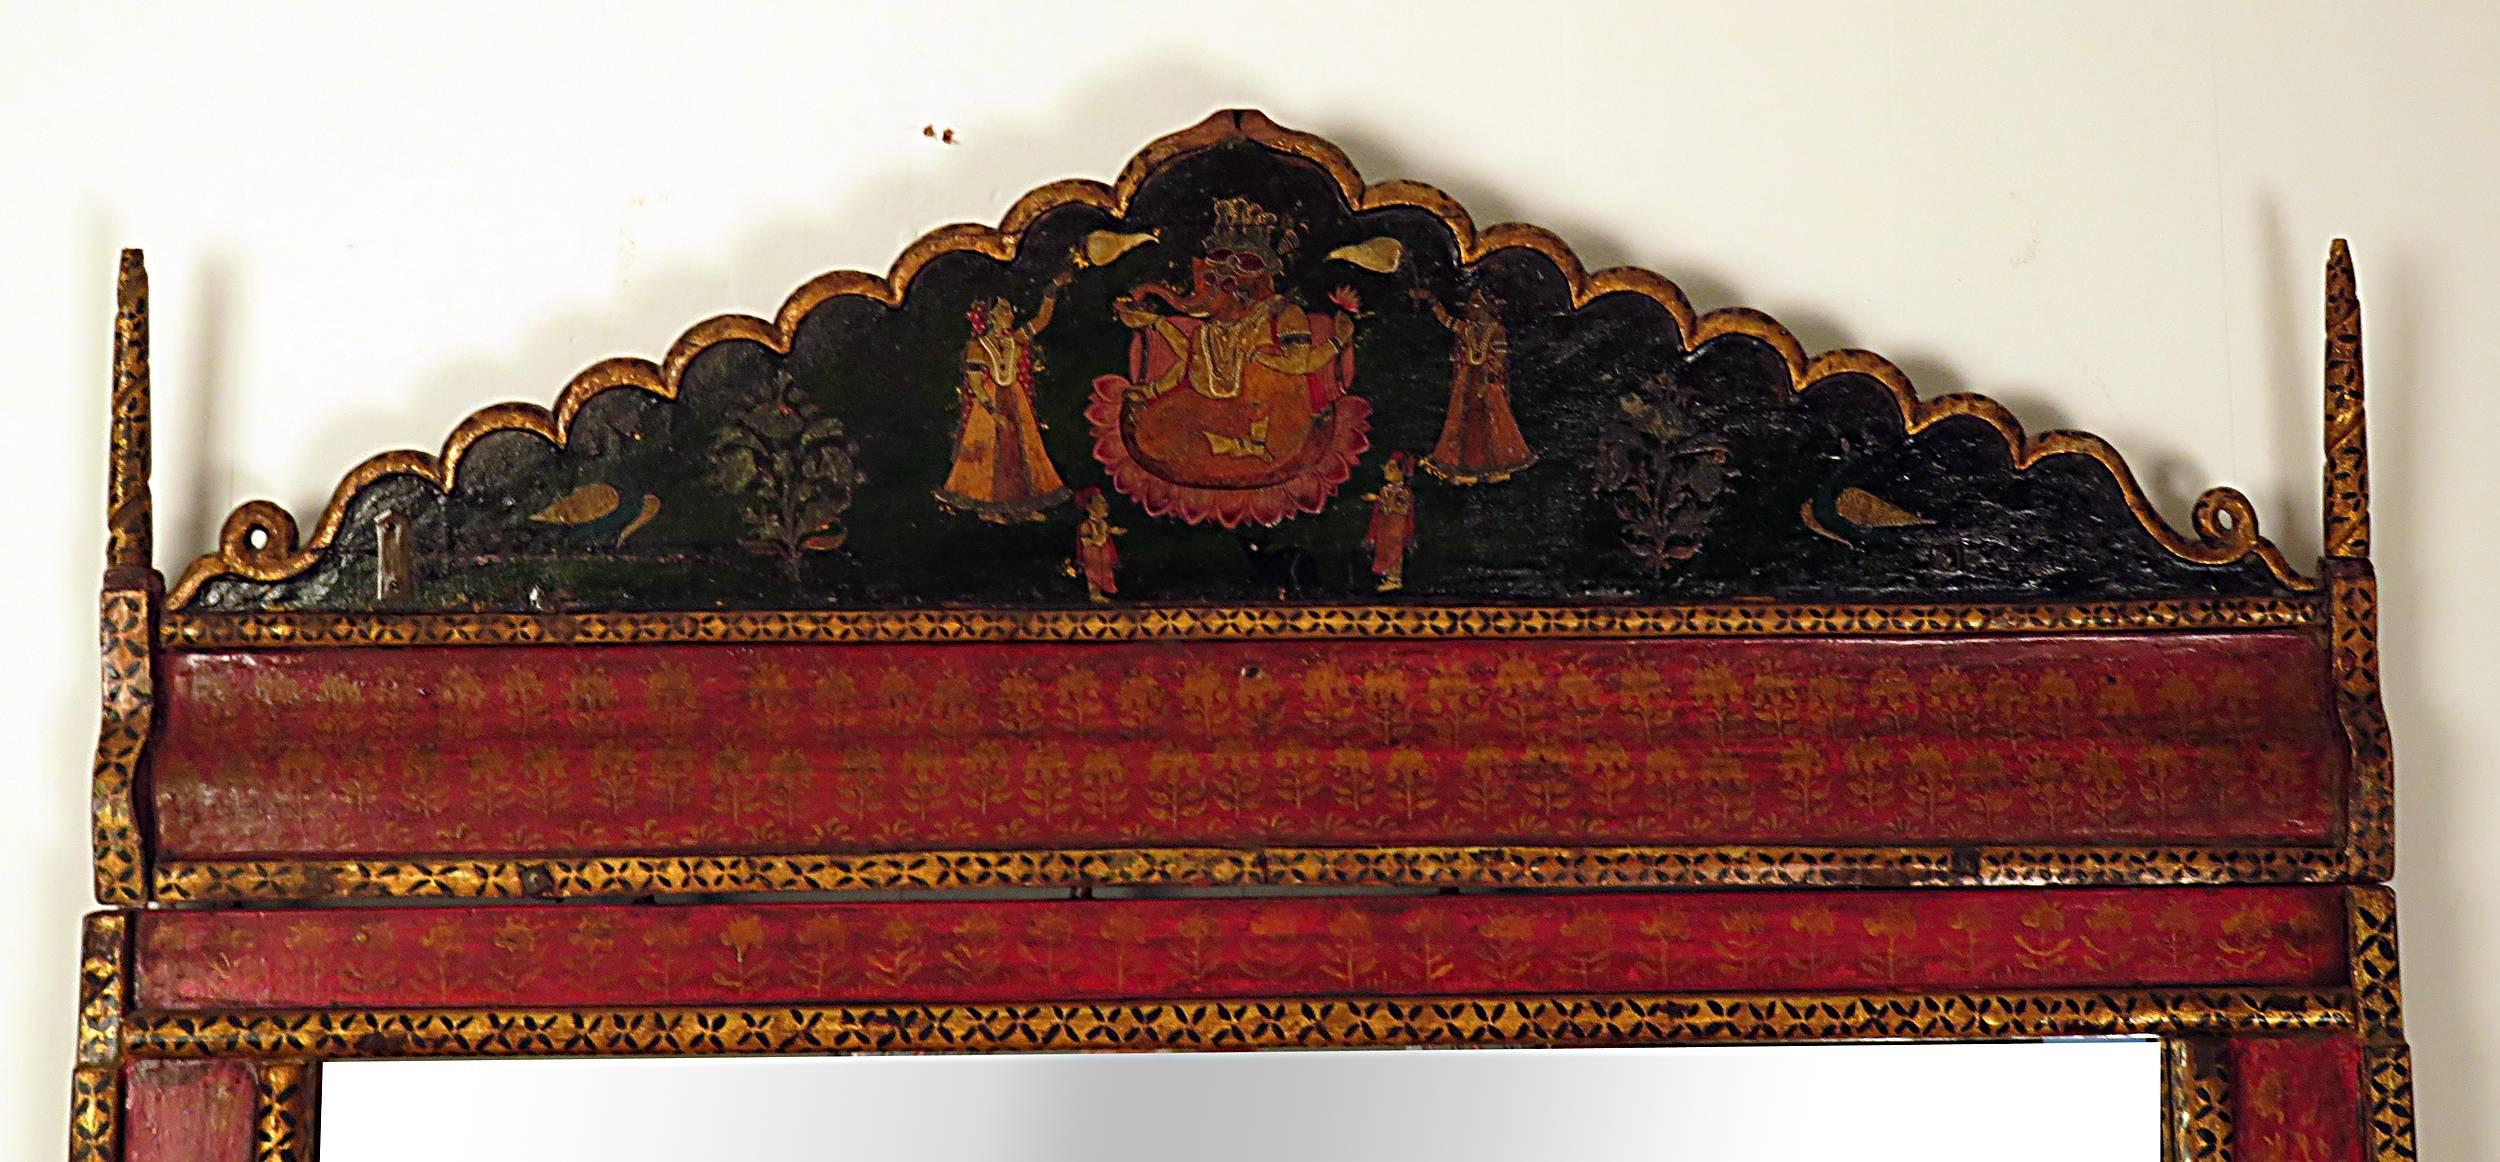 19th century Indian architectural element featuring Ganesha with two attendants later mounted on the crown of a custom matching mirror frame. Painted in brilliant reds and deep green with gilt accents.  Very dramatic and sophisticated mirror.  Nice